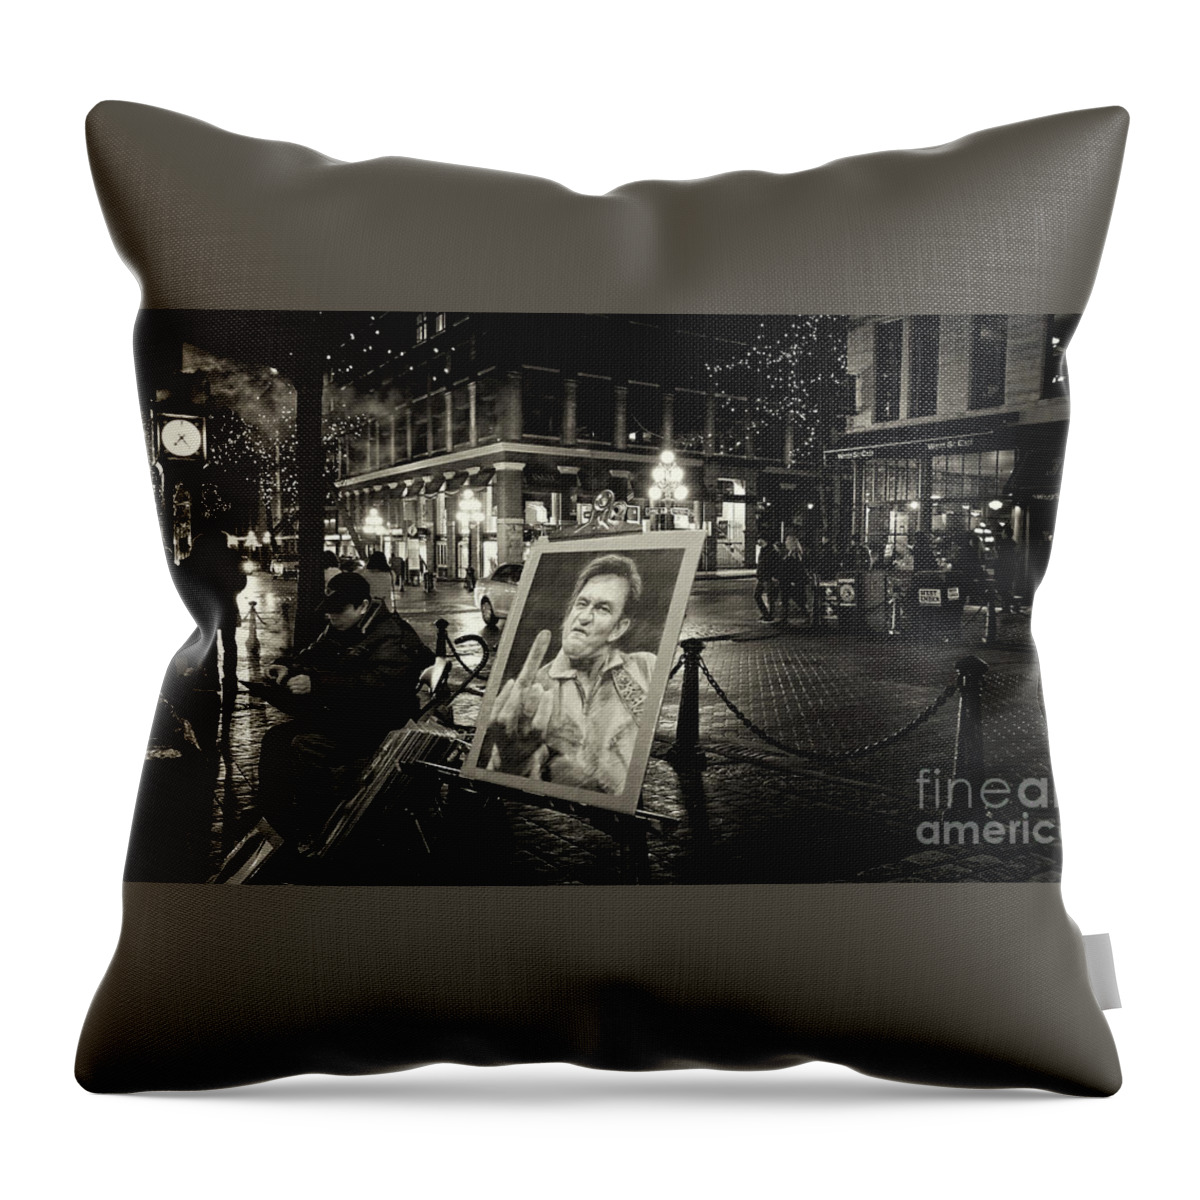 Monochrome Throw Pillow featuring the photograph Steamin' Johnny by Cameron Wood